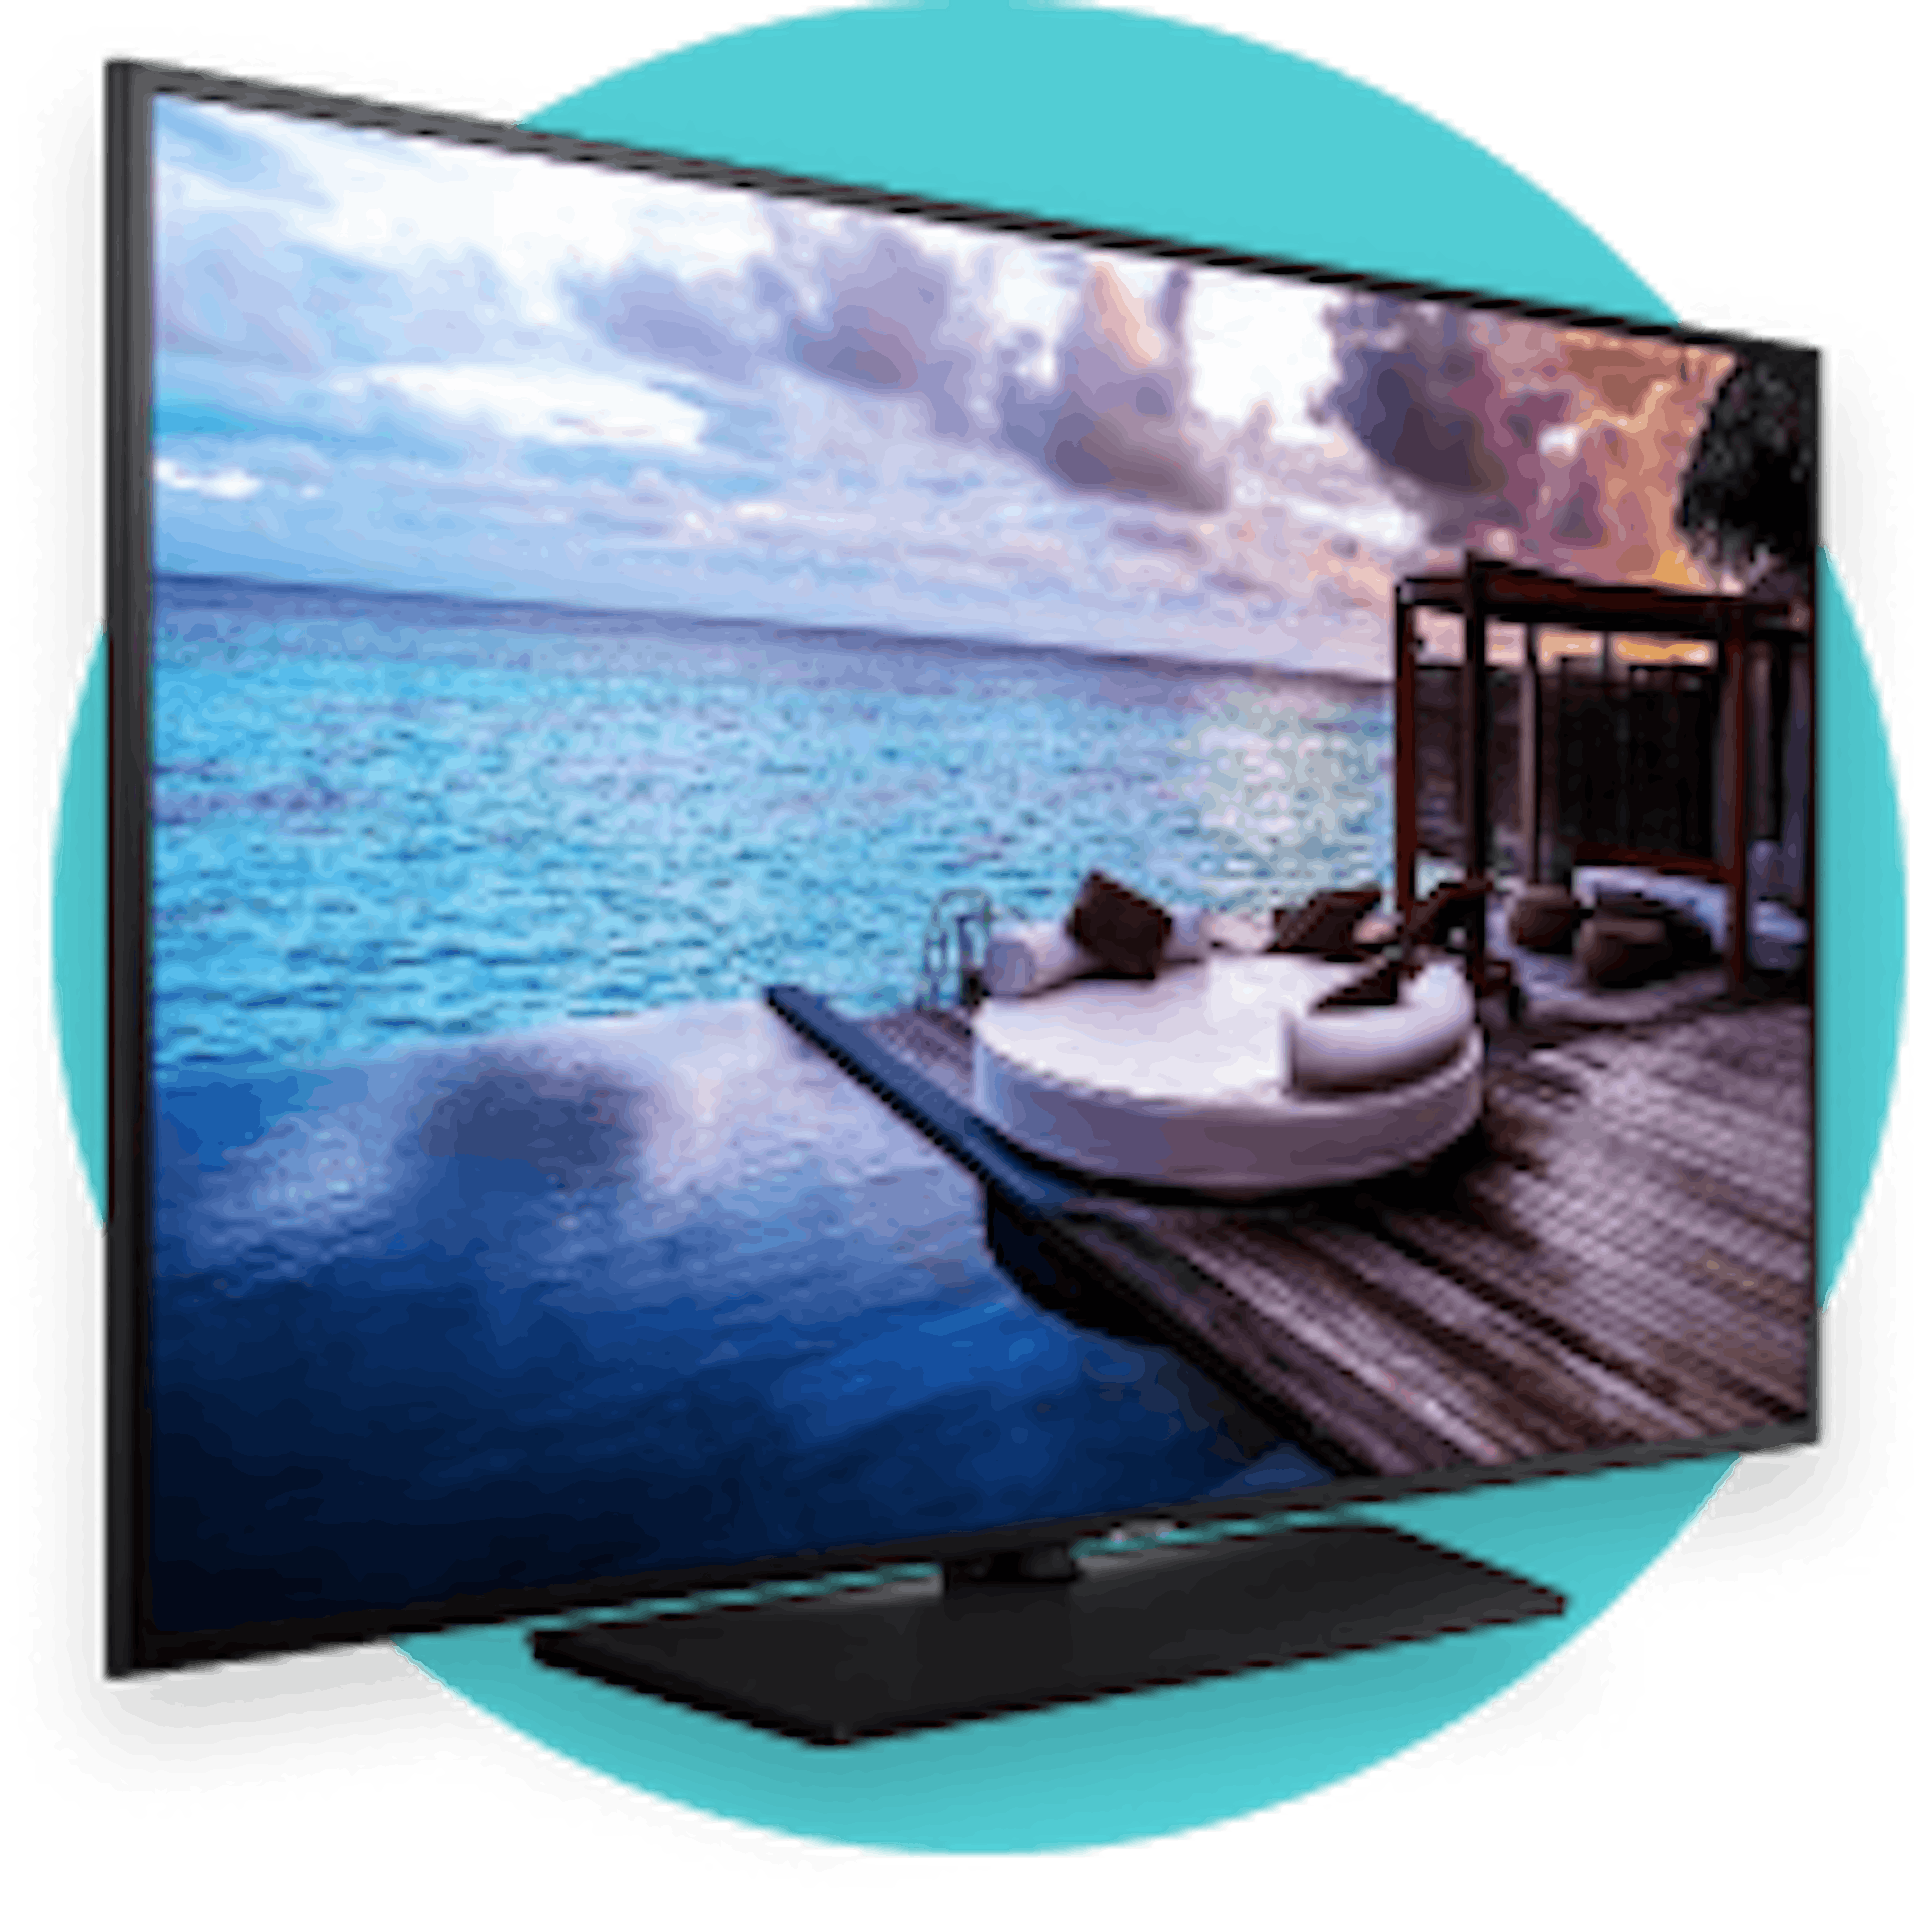 Hotel TV, Commercial TV